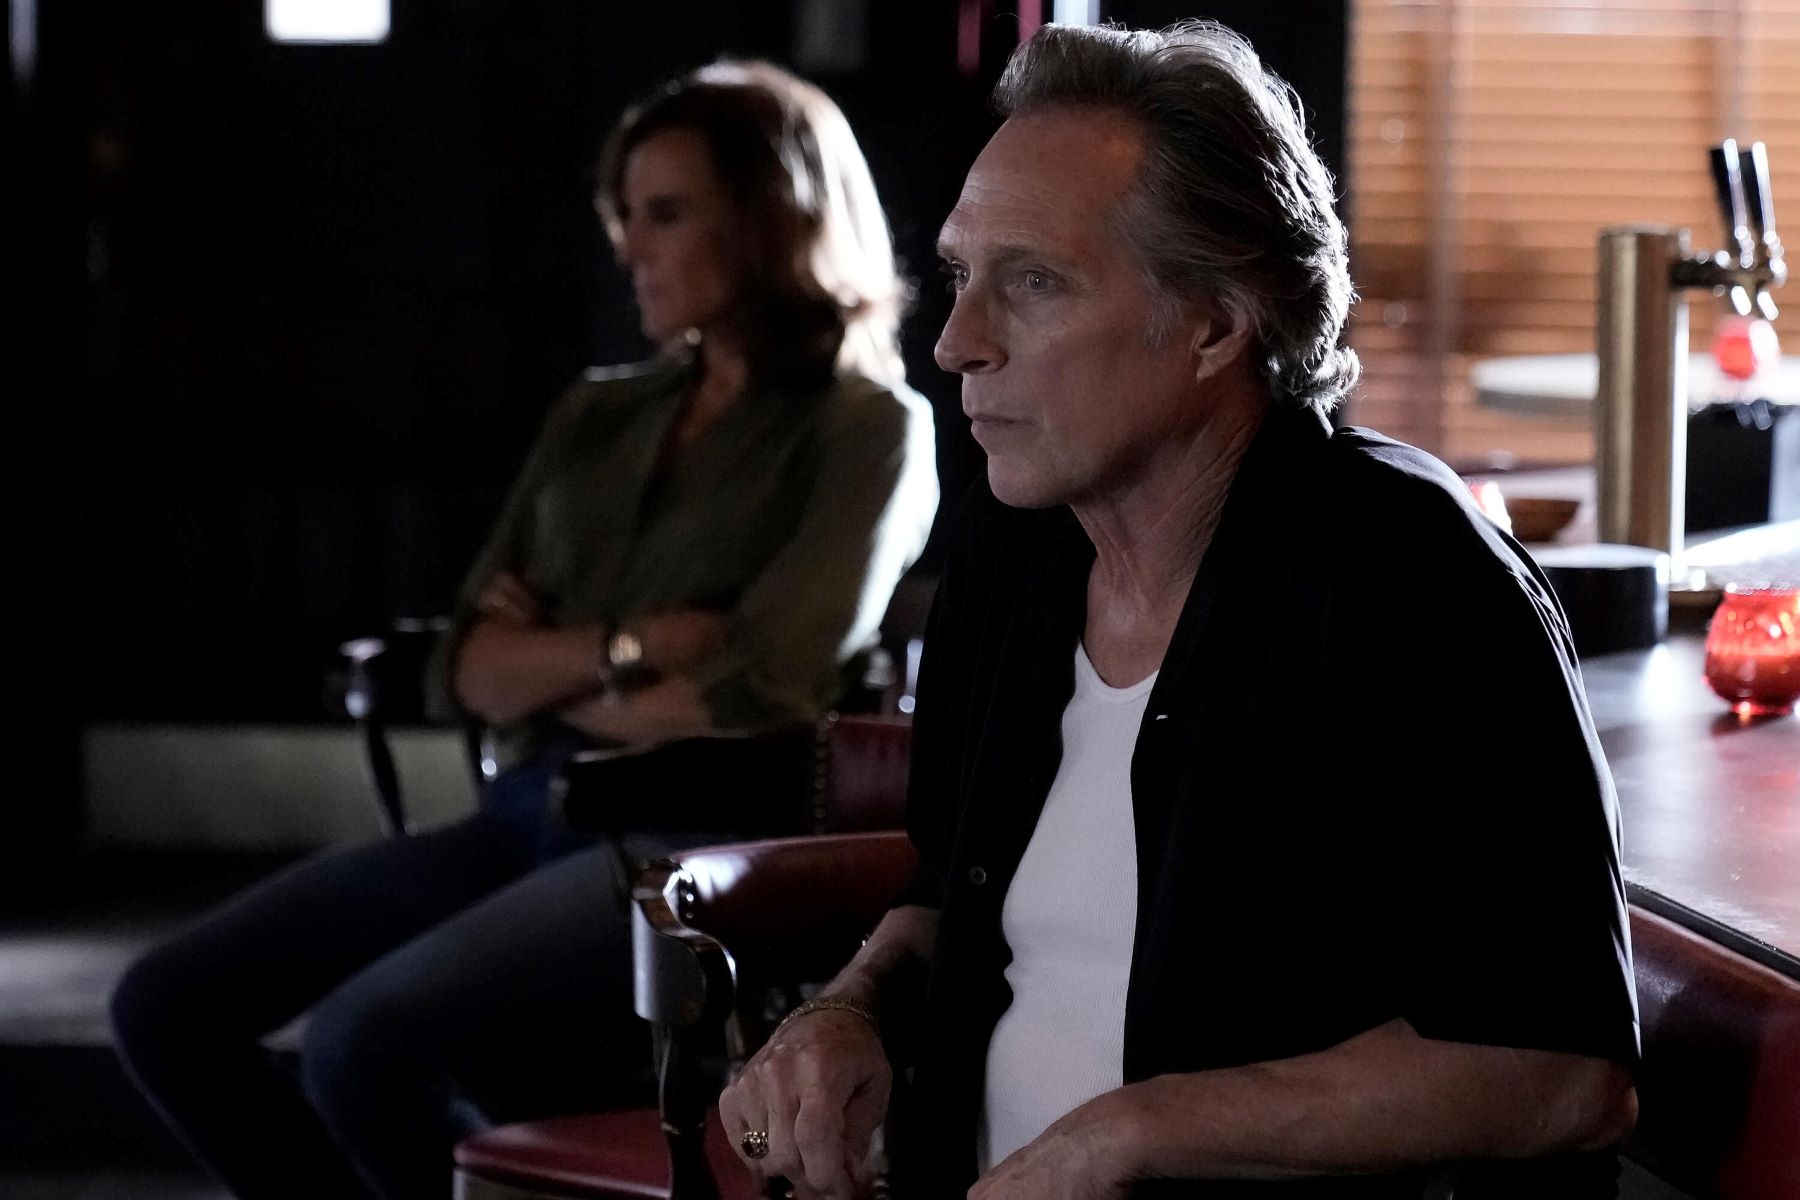 William Fichtner, in character as Leo Nicoletti in 'The Company You Keep' on ABC, wears a black short-sleeved button-up shirt over a white shirt.